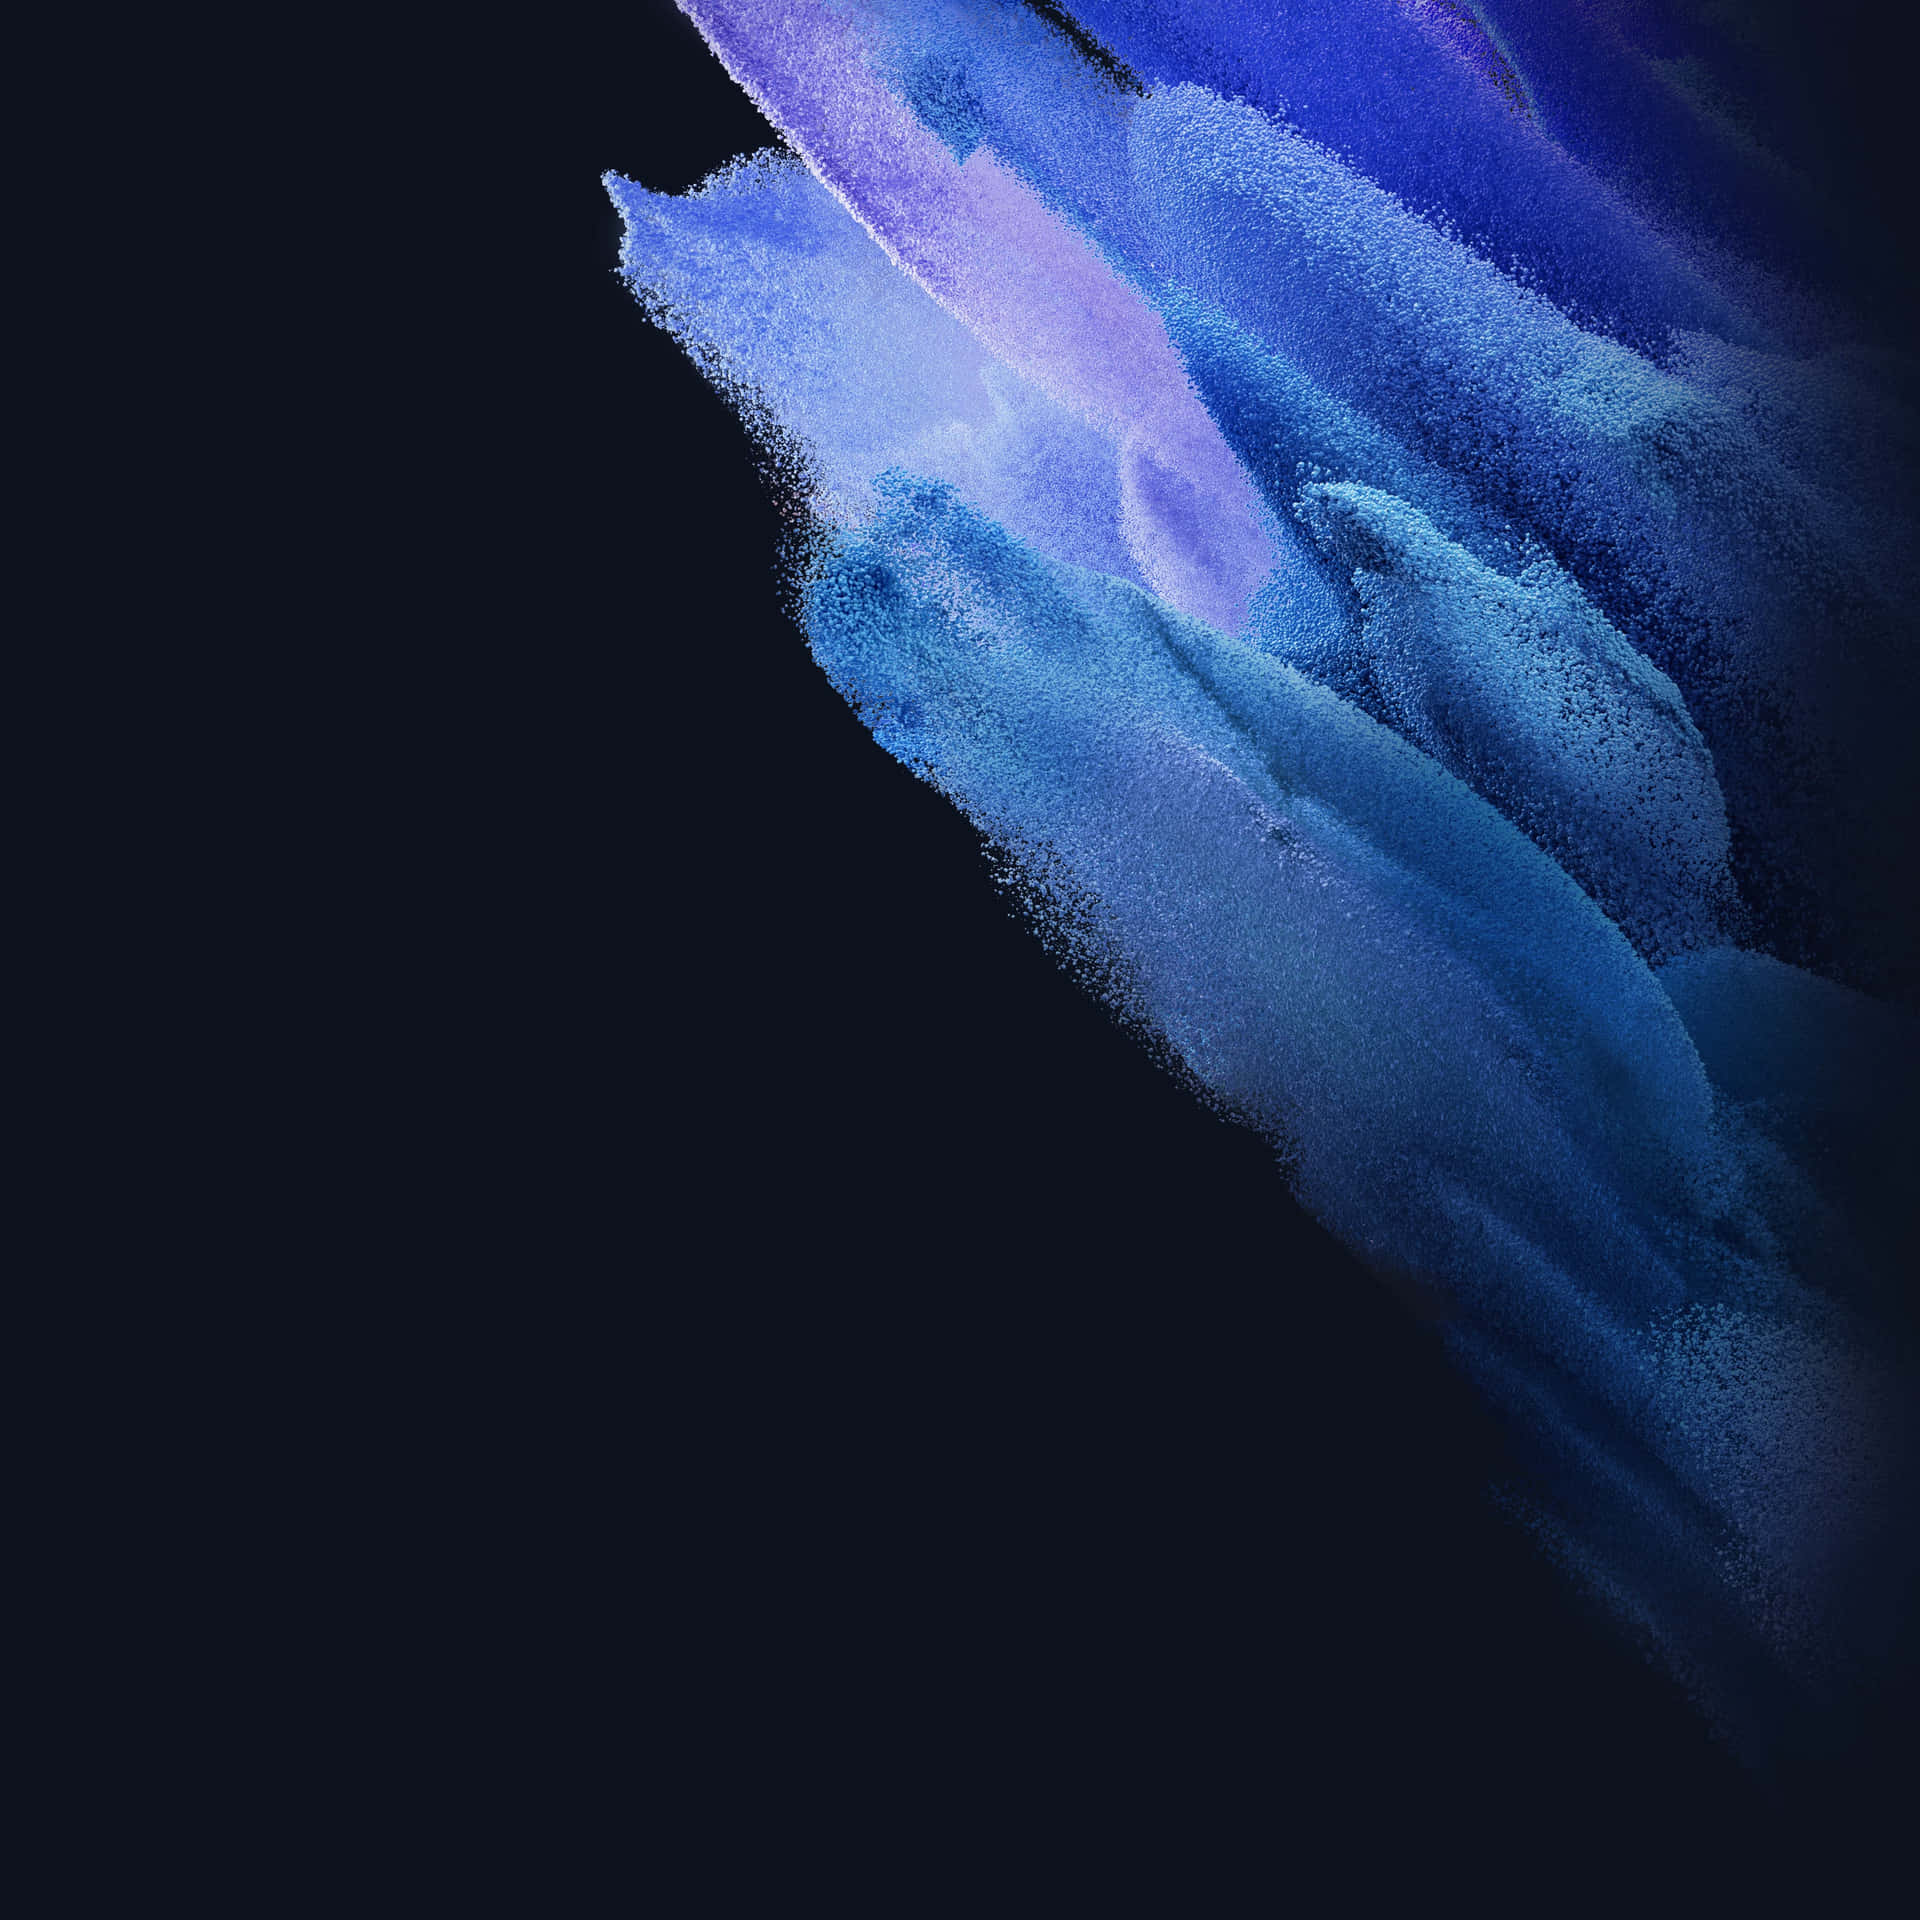 An electric blue Amoled display Wallpaper